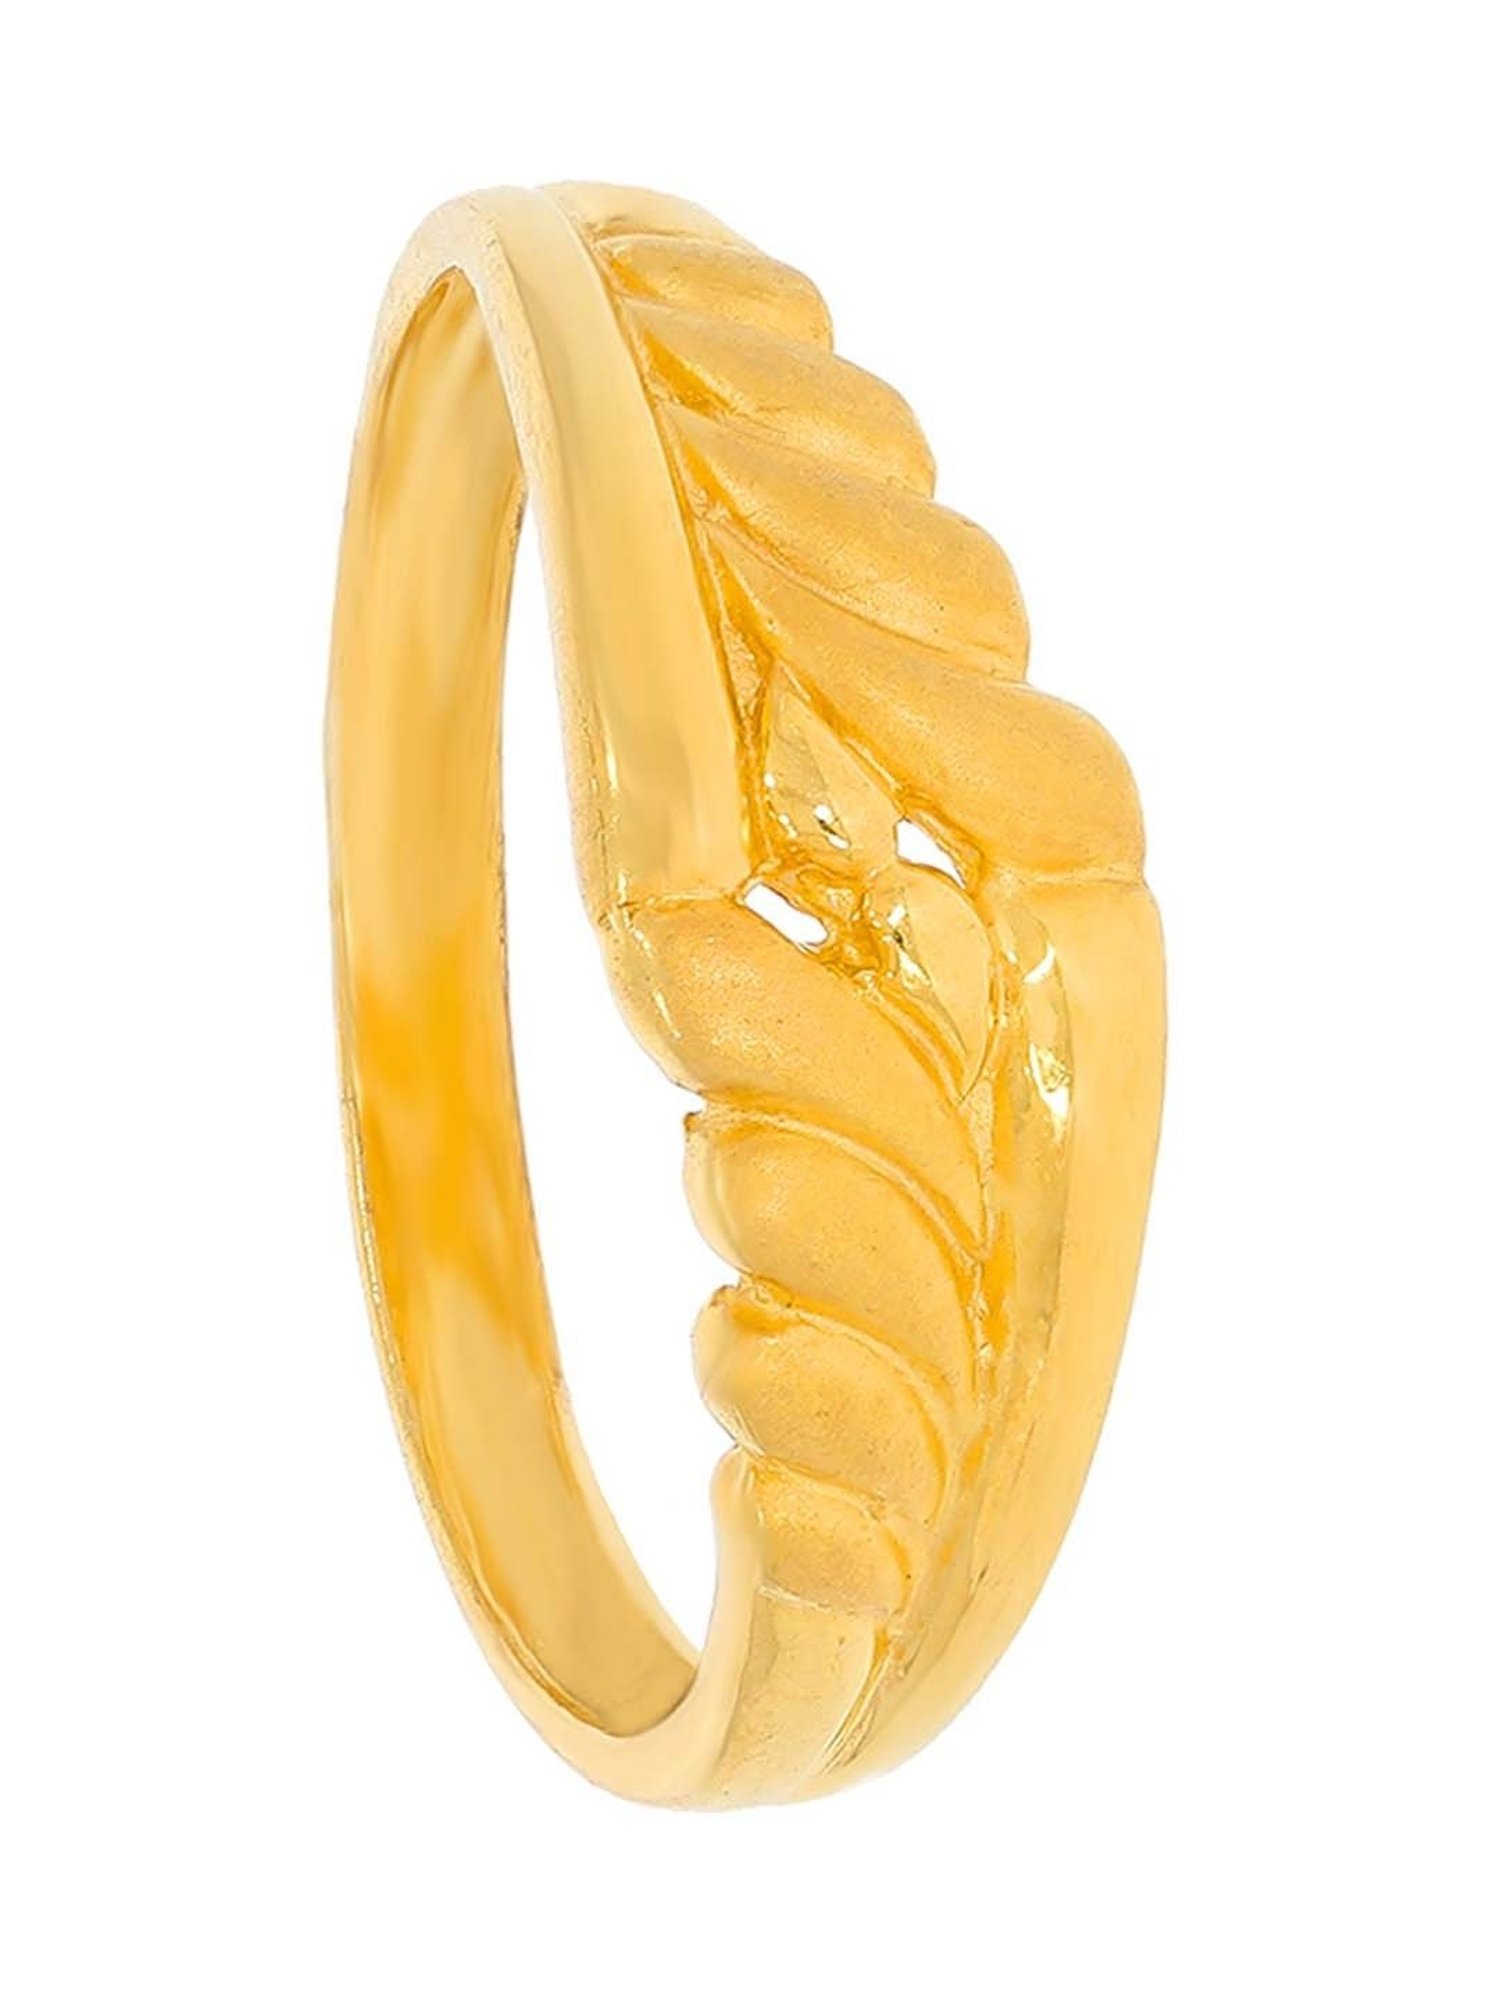 Buy WHP Anala Yellow Gold Ring For Women, 22KT (916) BIS Hallmark Pure  Gold, Gold Jewellery, Womens Fashion Accessories, Simple Ring For Women,  Suitable For Gifting at Amazon.in